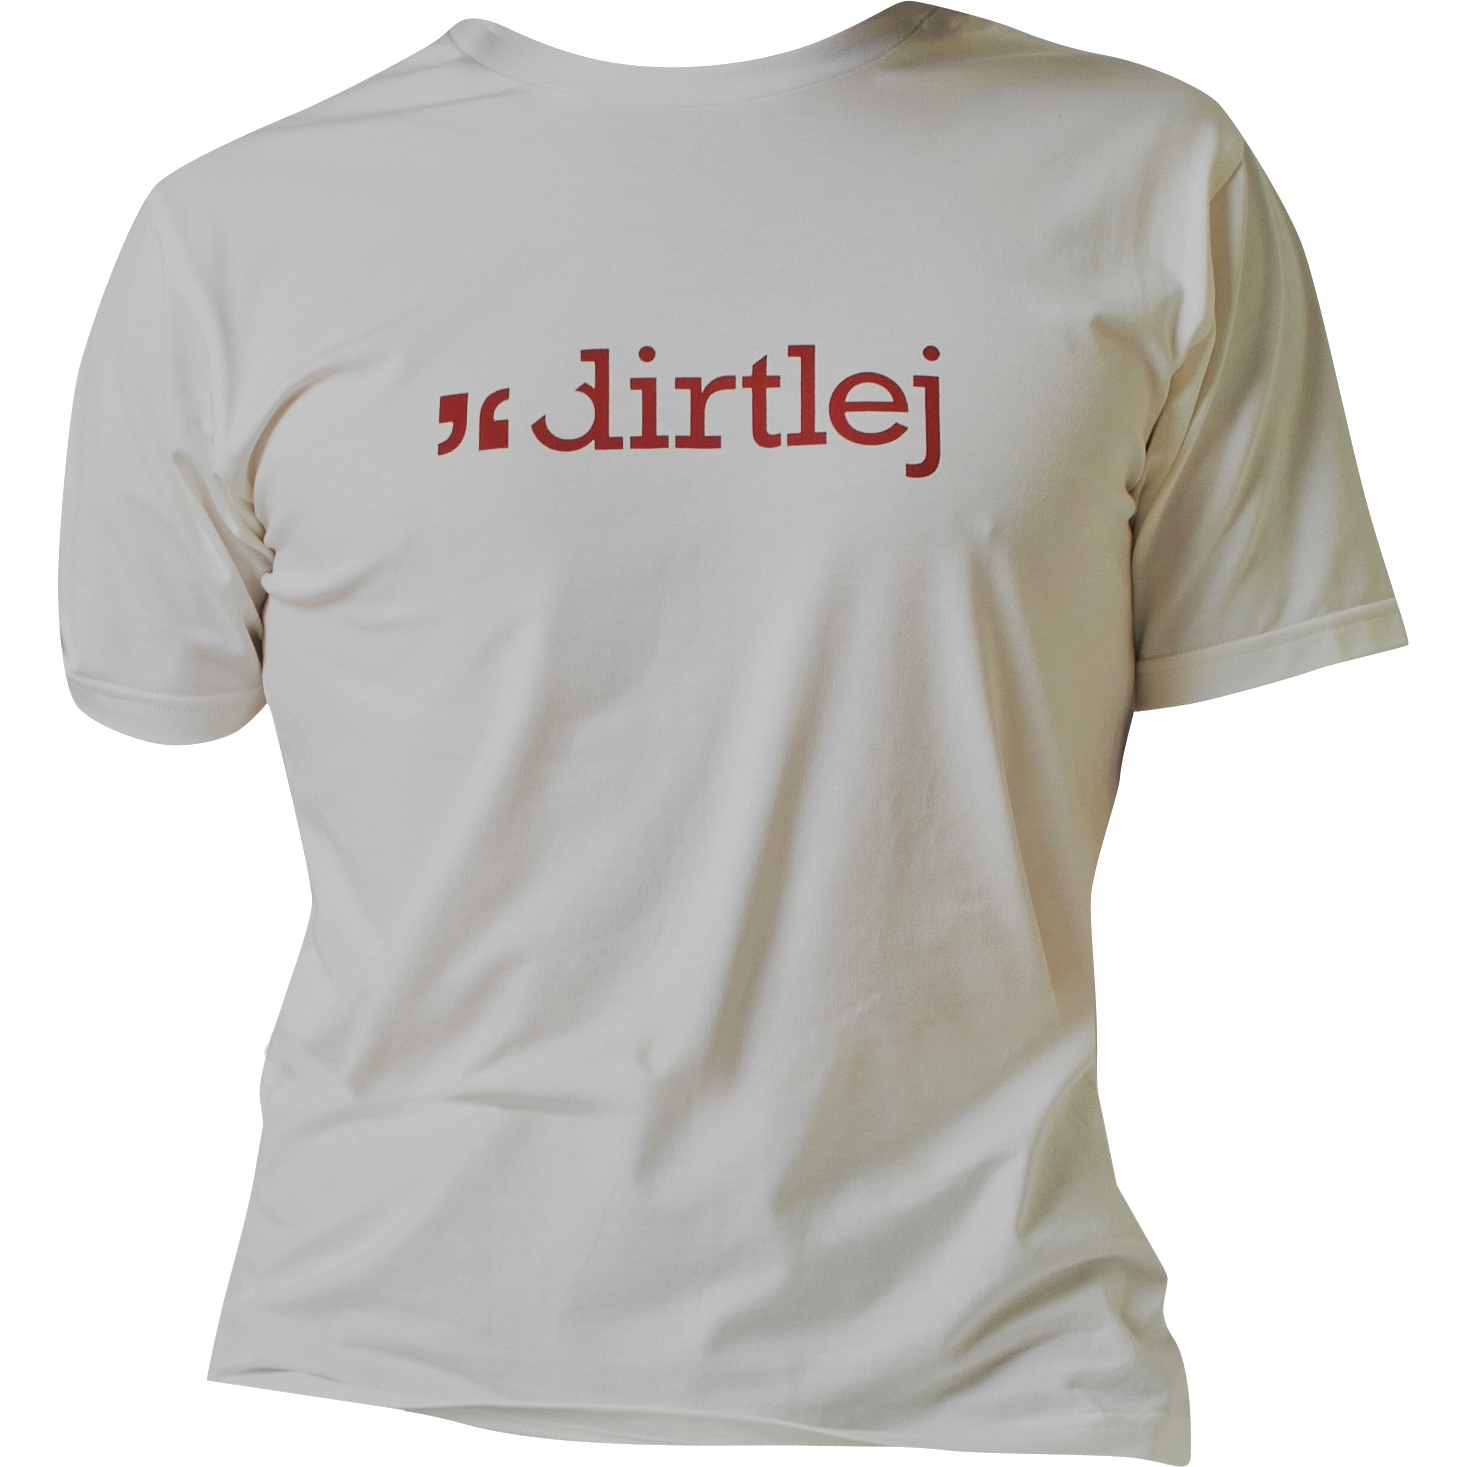 Picture of Dirtlej Supima T-Shirt - off white